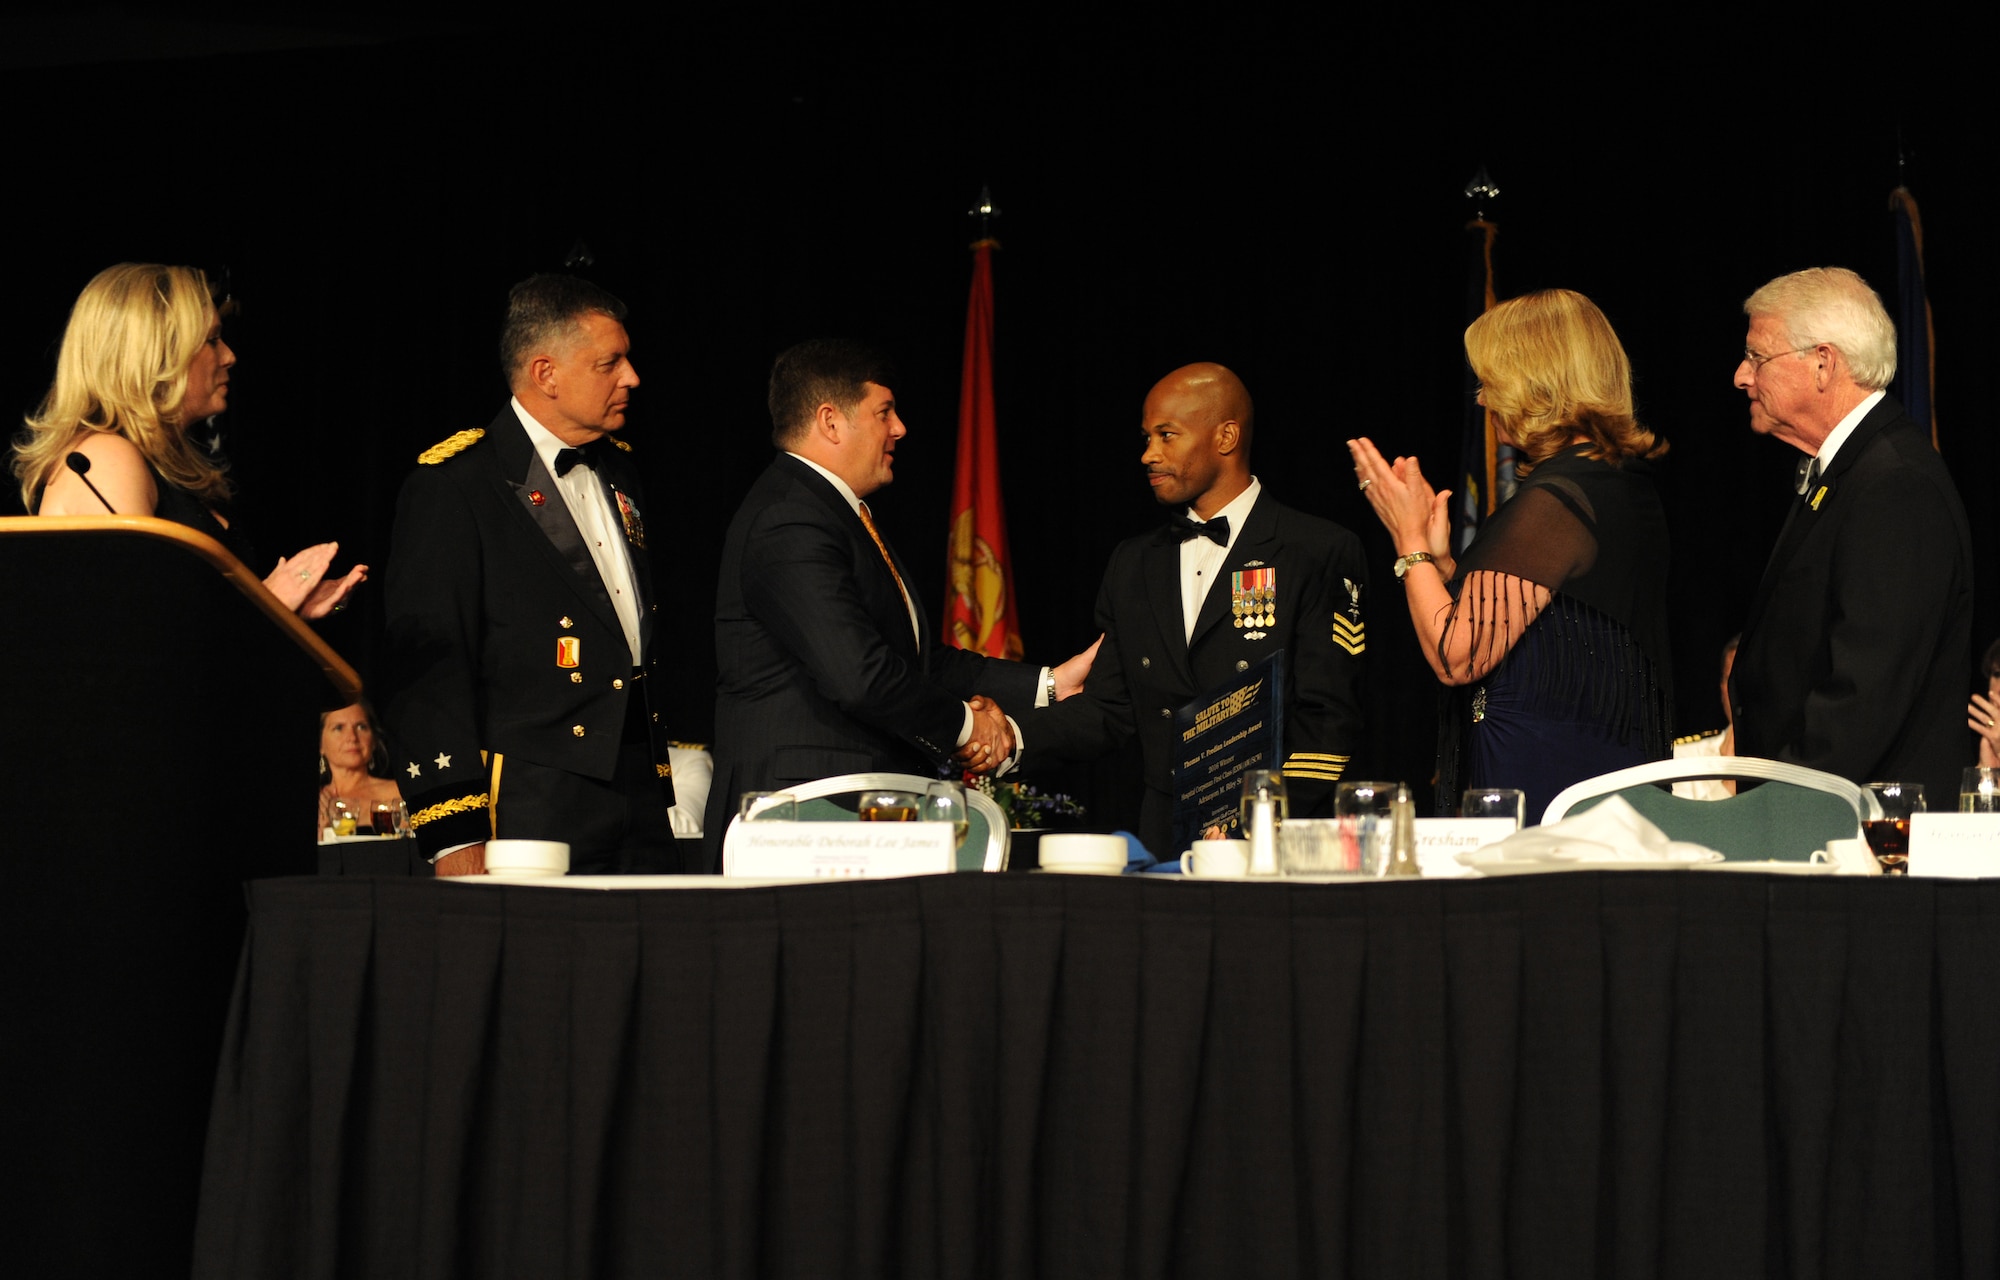 U.S. Navy Petty Officer 1st Class Adrianyon Riley, Sr., Naval Construction Battalion Center, Gulfport, Miss., hospital corpsman, receives the Thomas V. Fredian Community Leadership Award  from members of the head table during the 38th Annual Salute to the Military at the Mississippi Coast Convention Center, Oct. 25, 2016, Biloxi, Miss. The Salute to the Military event recognized the men and women who serve in the military along the Gulf Coast. (U.S. Air Force photo by Kemberly Groue/Released)